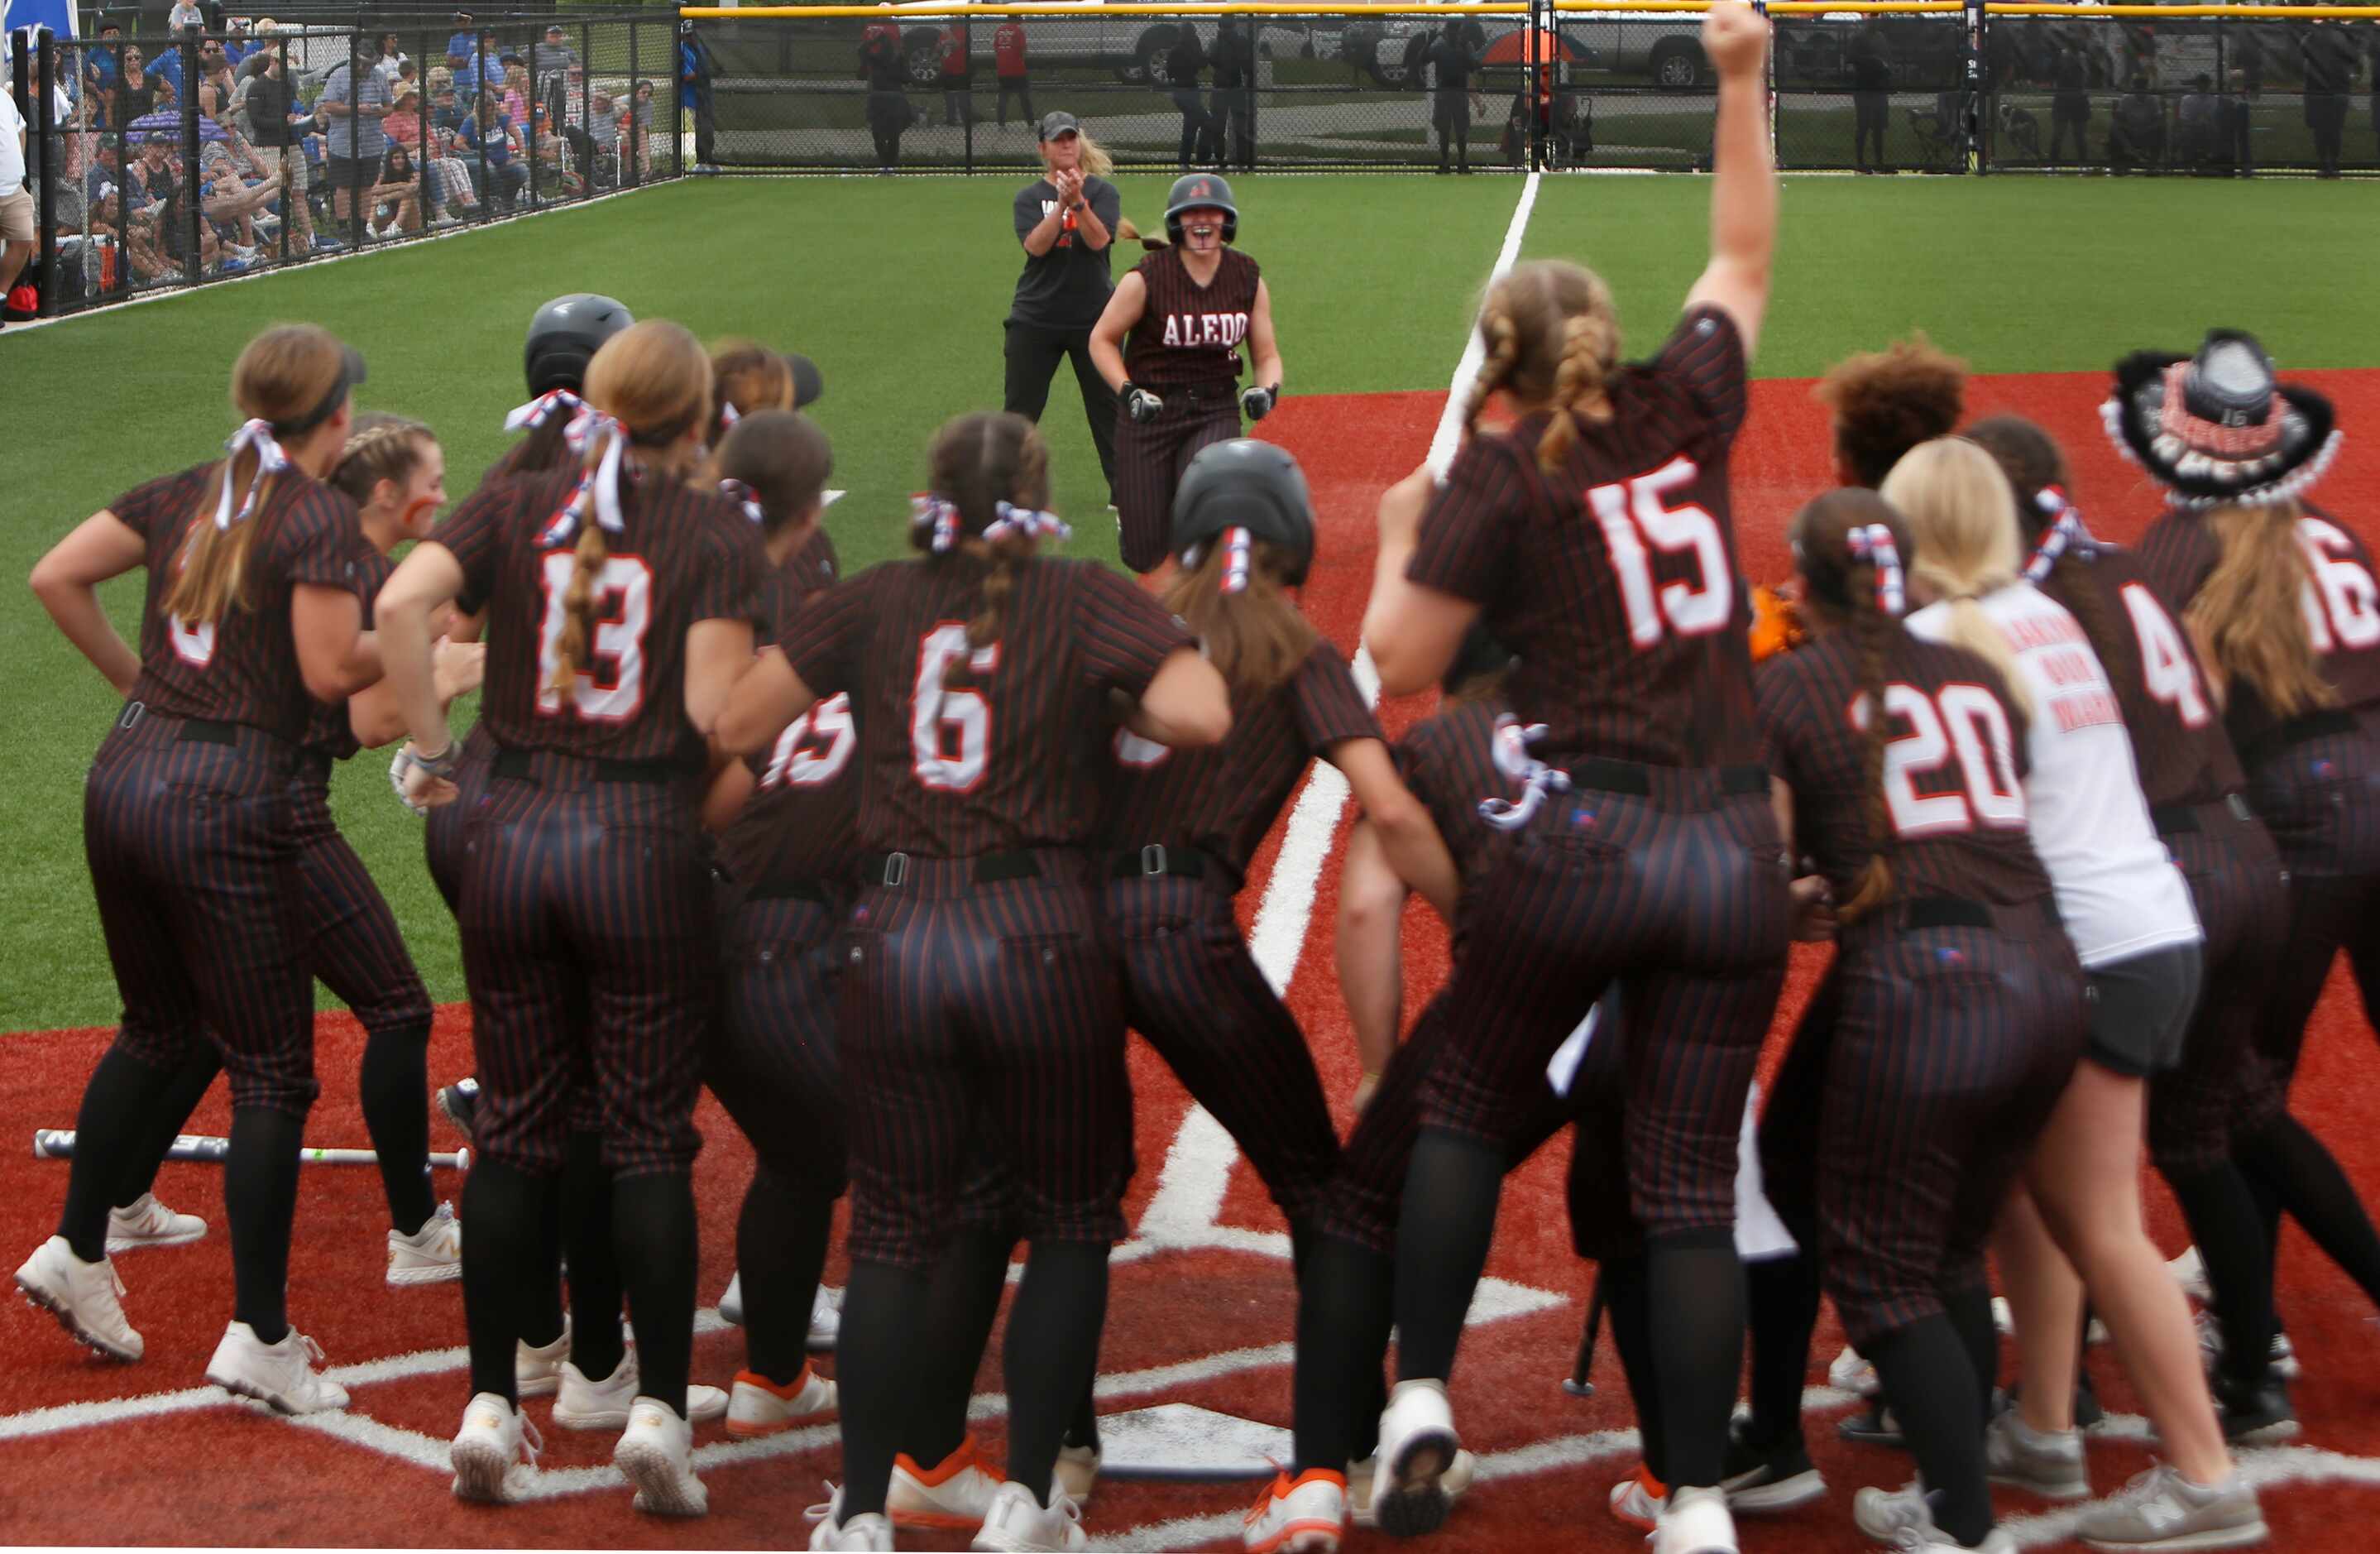 Aledo outfielder Marissa Powell (11) received quite the reception at home plate after...